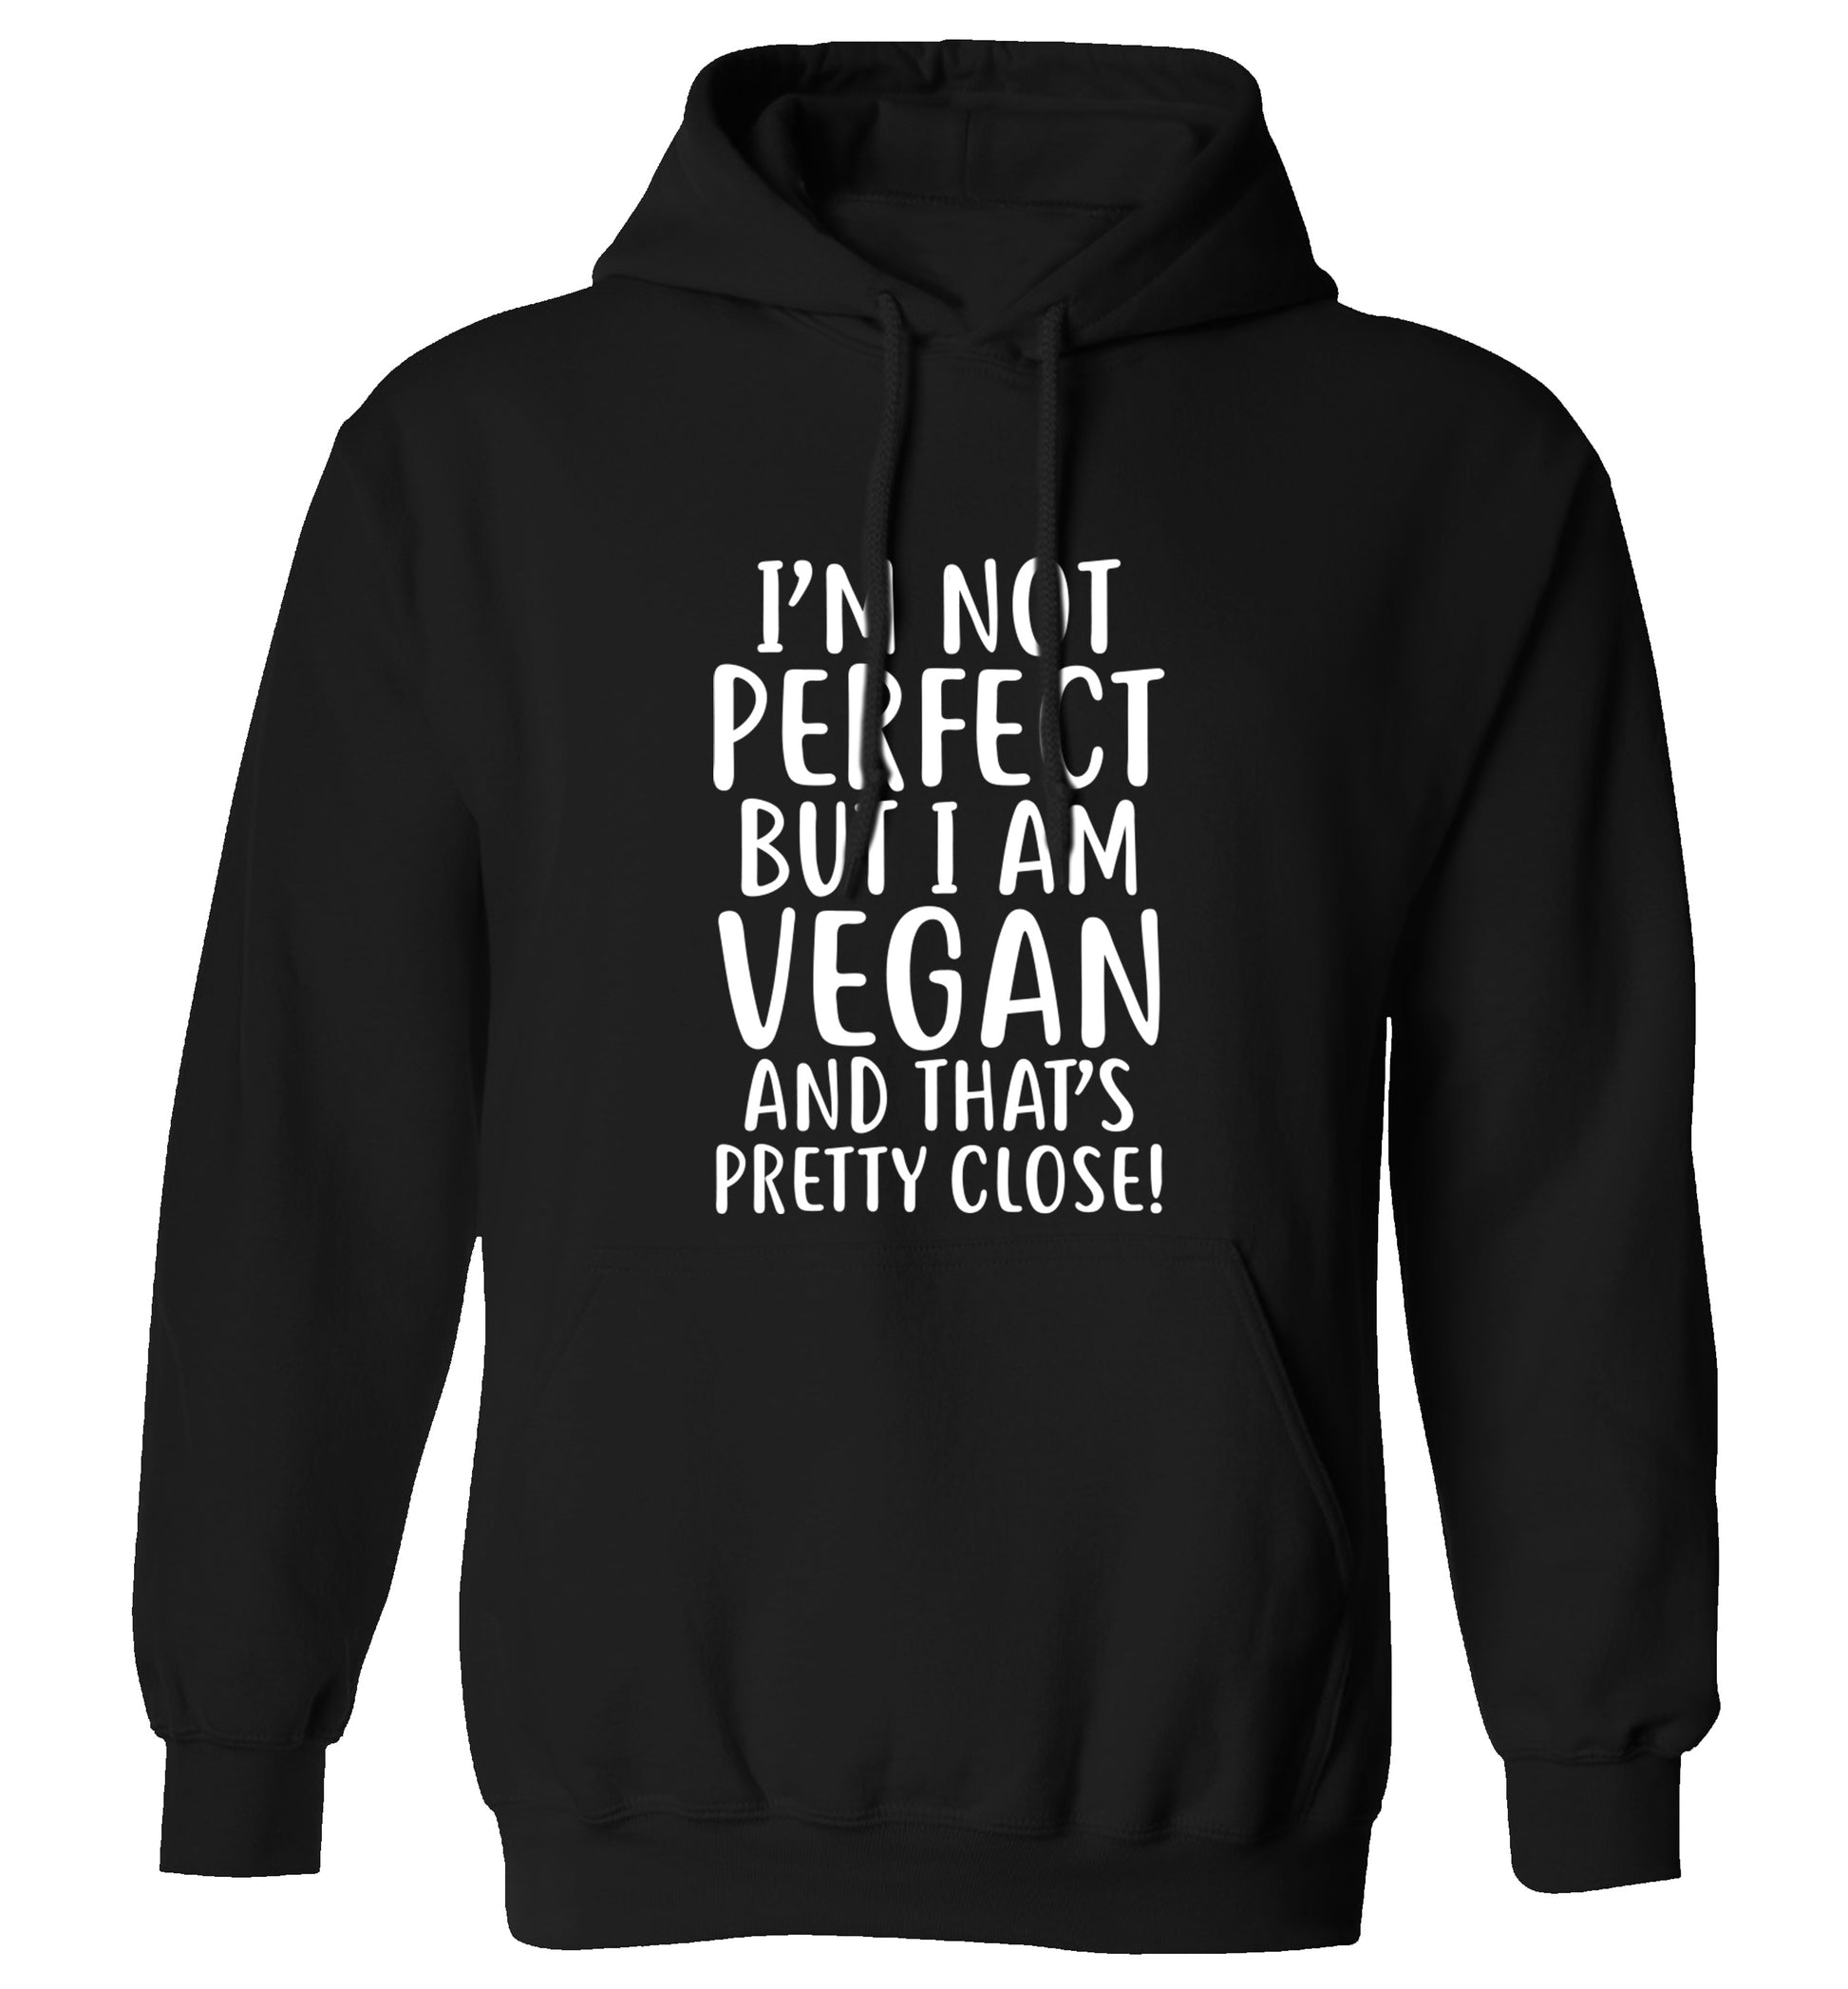 Might not be perfect but I am vegan adults unisex black hoodie 2XL